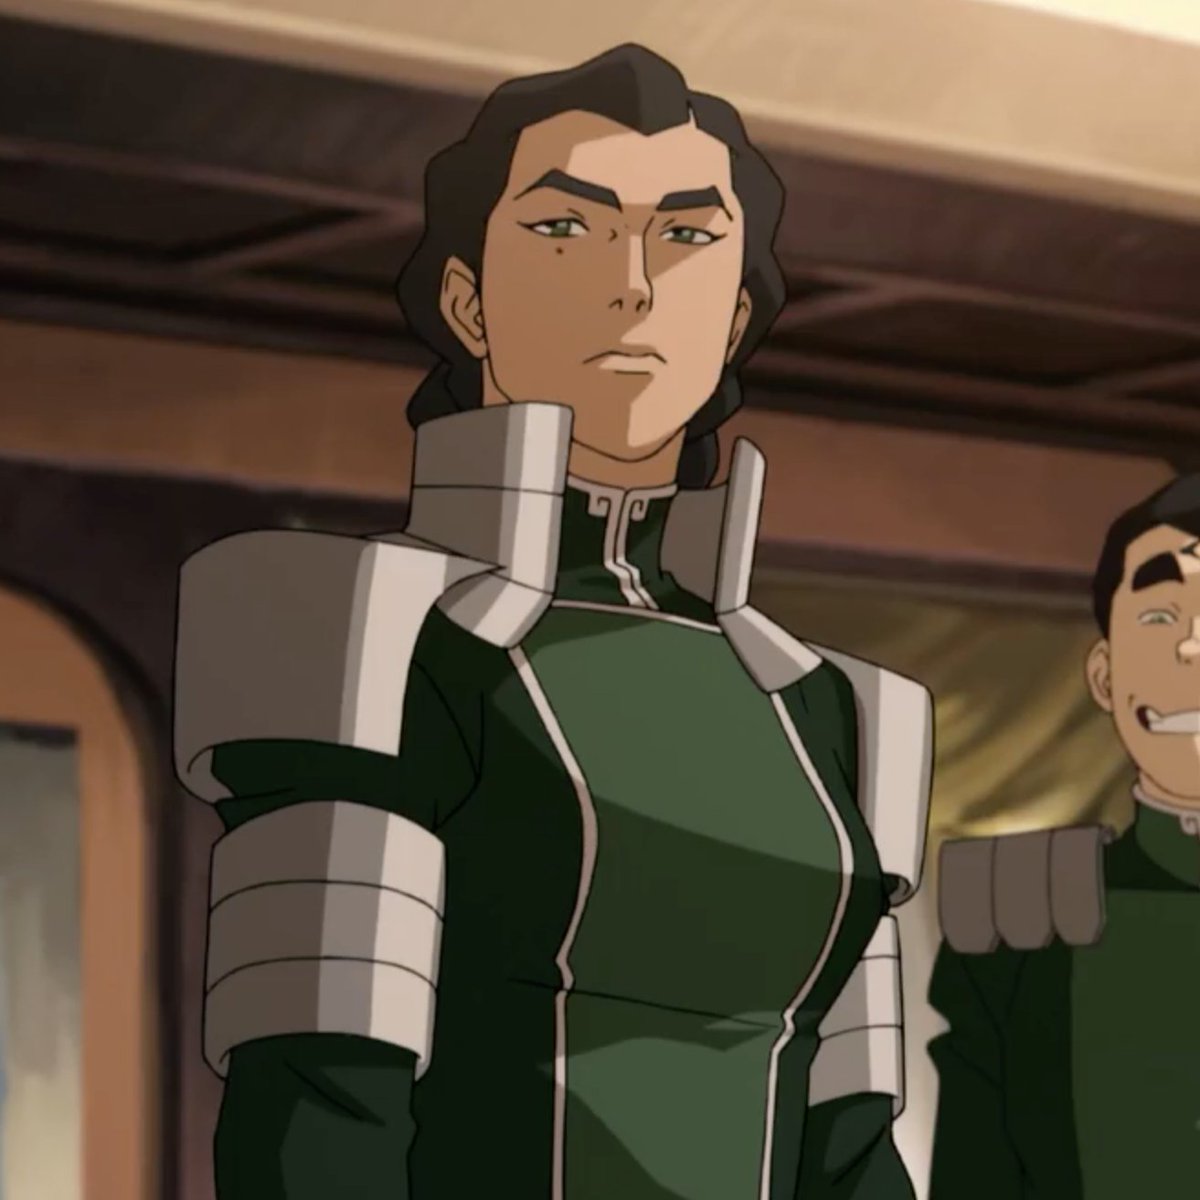 this thread is just gonna turn into me thirsting over kuvira. im sorry